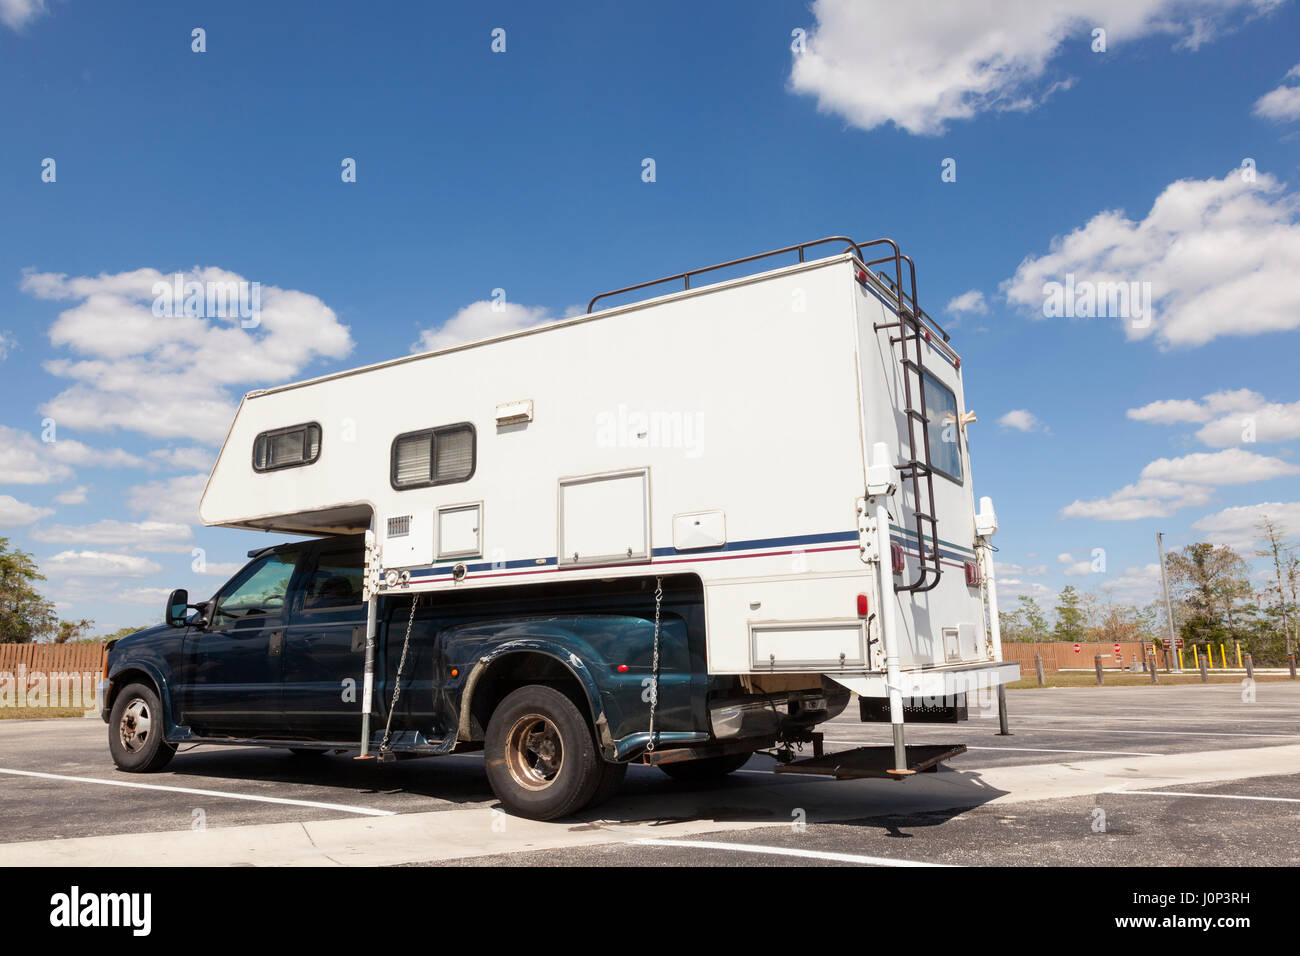 Older recreational vehicle at the parking lot in Everglades National Park. Florida, United States Stock Photo